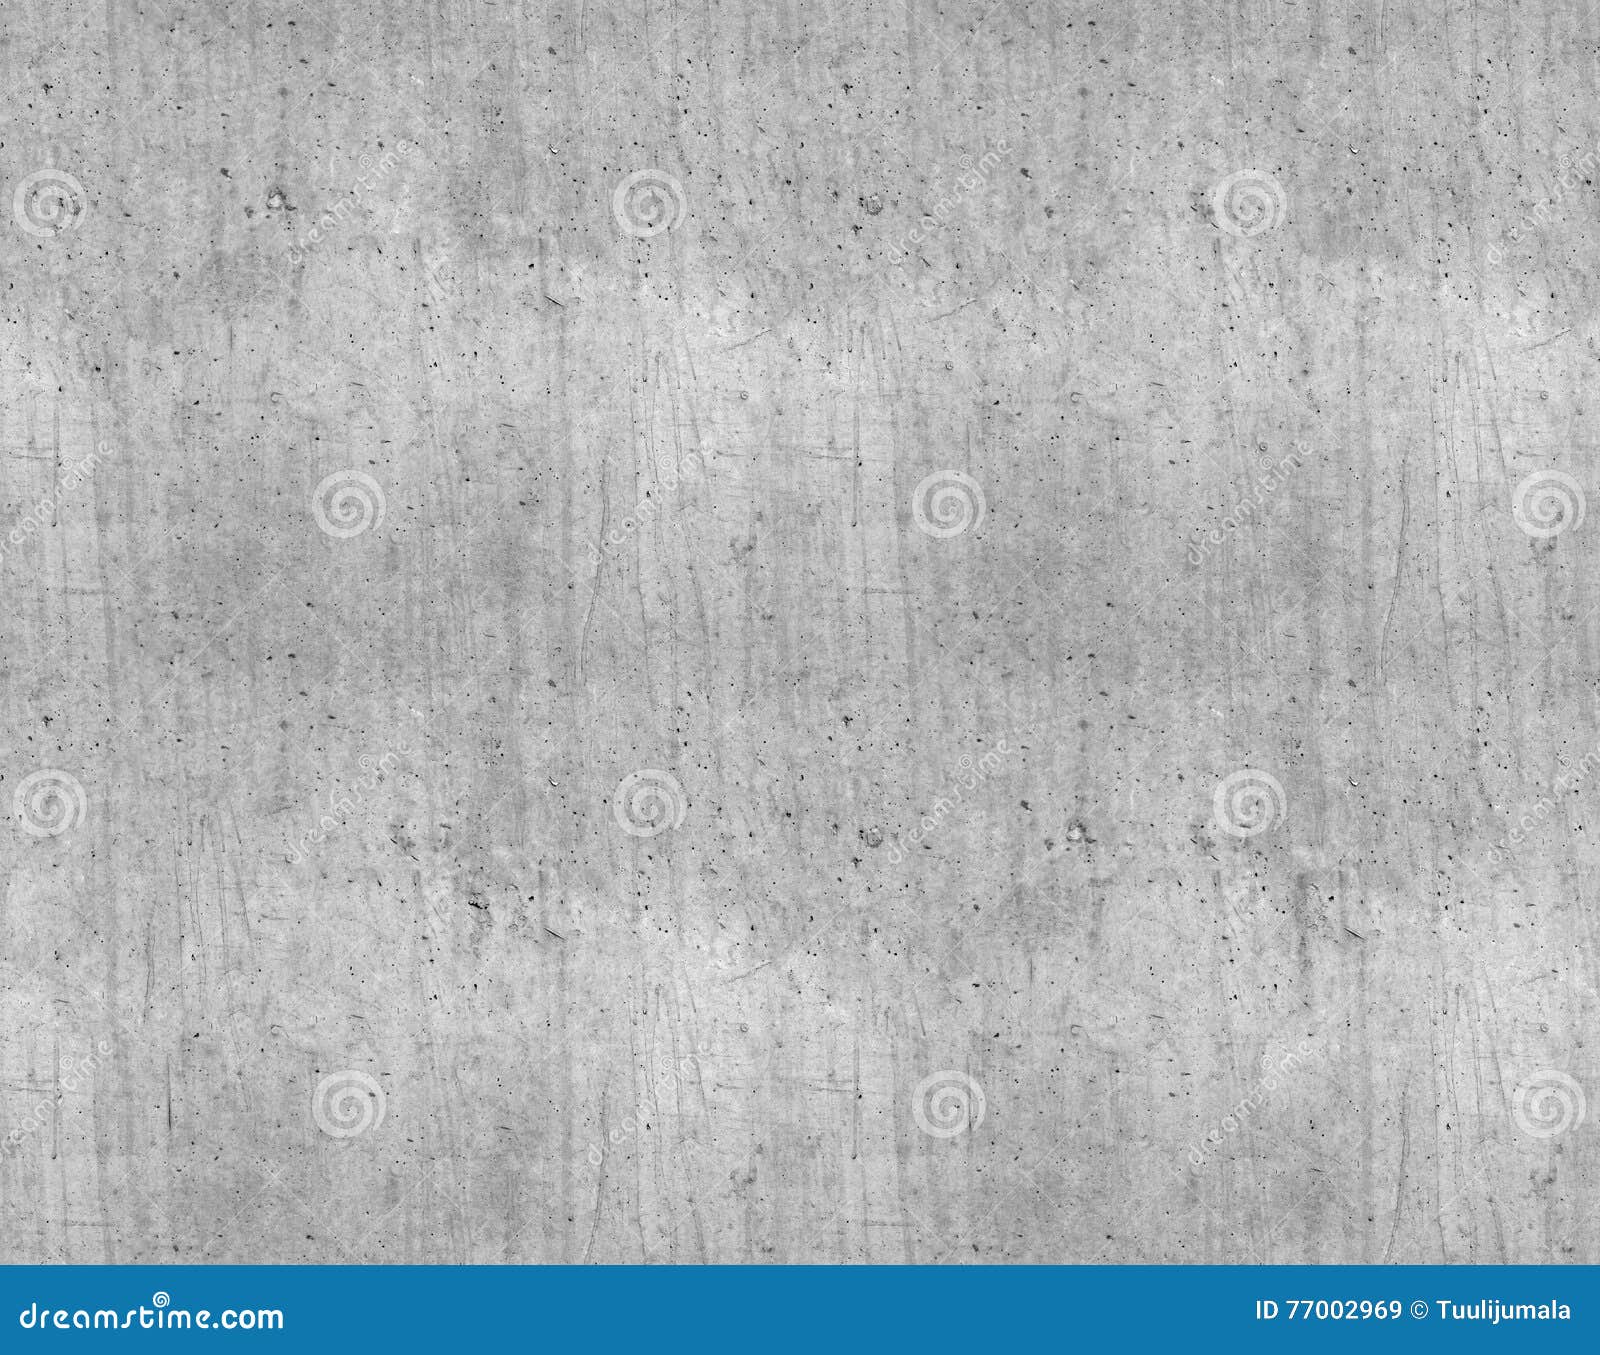 https://thumbs.dreamstime.com/z/seamless-concrete-texture-grey-smooth-new-wall-77002969.jpg